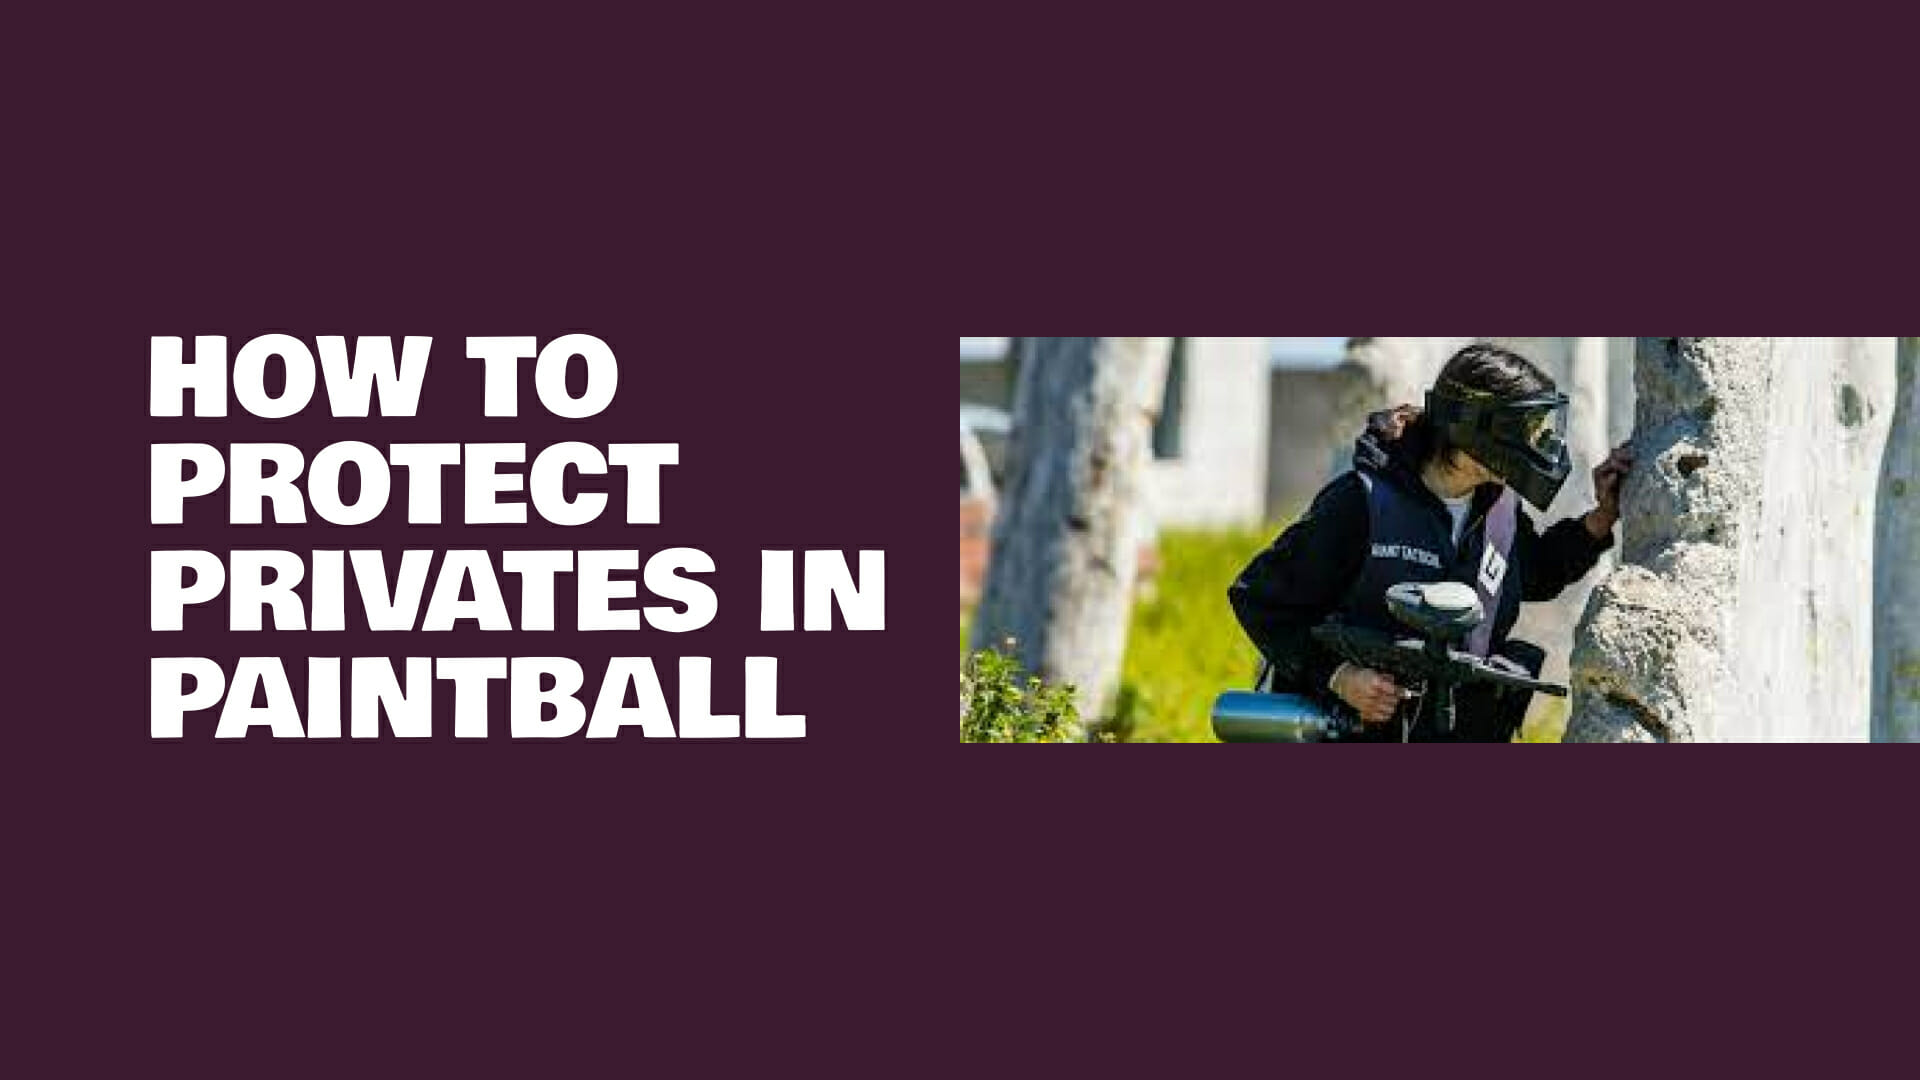 How To Protect Privates In Paintball